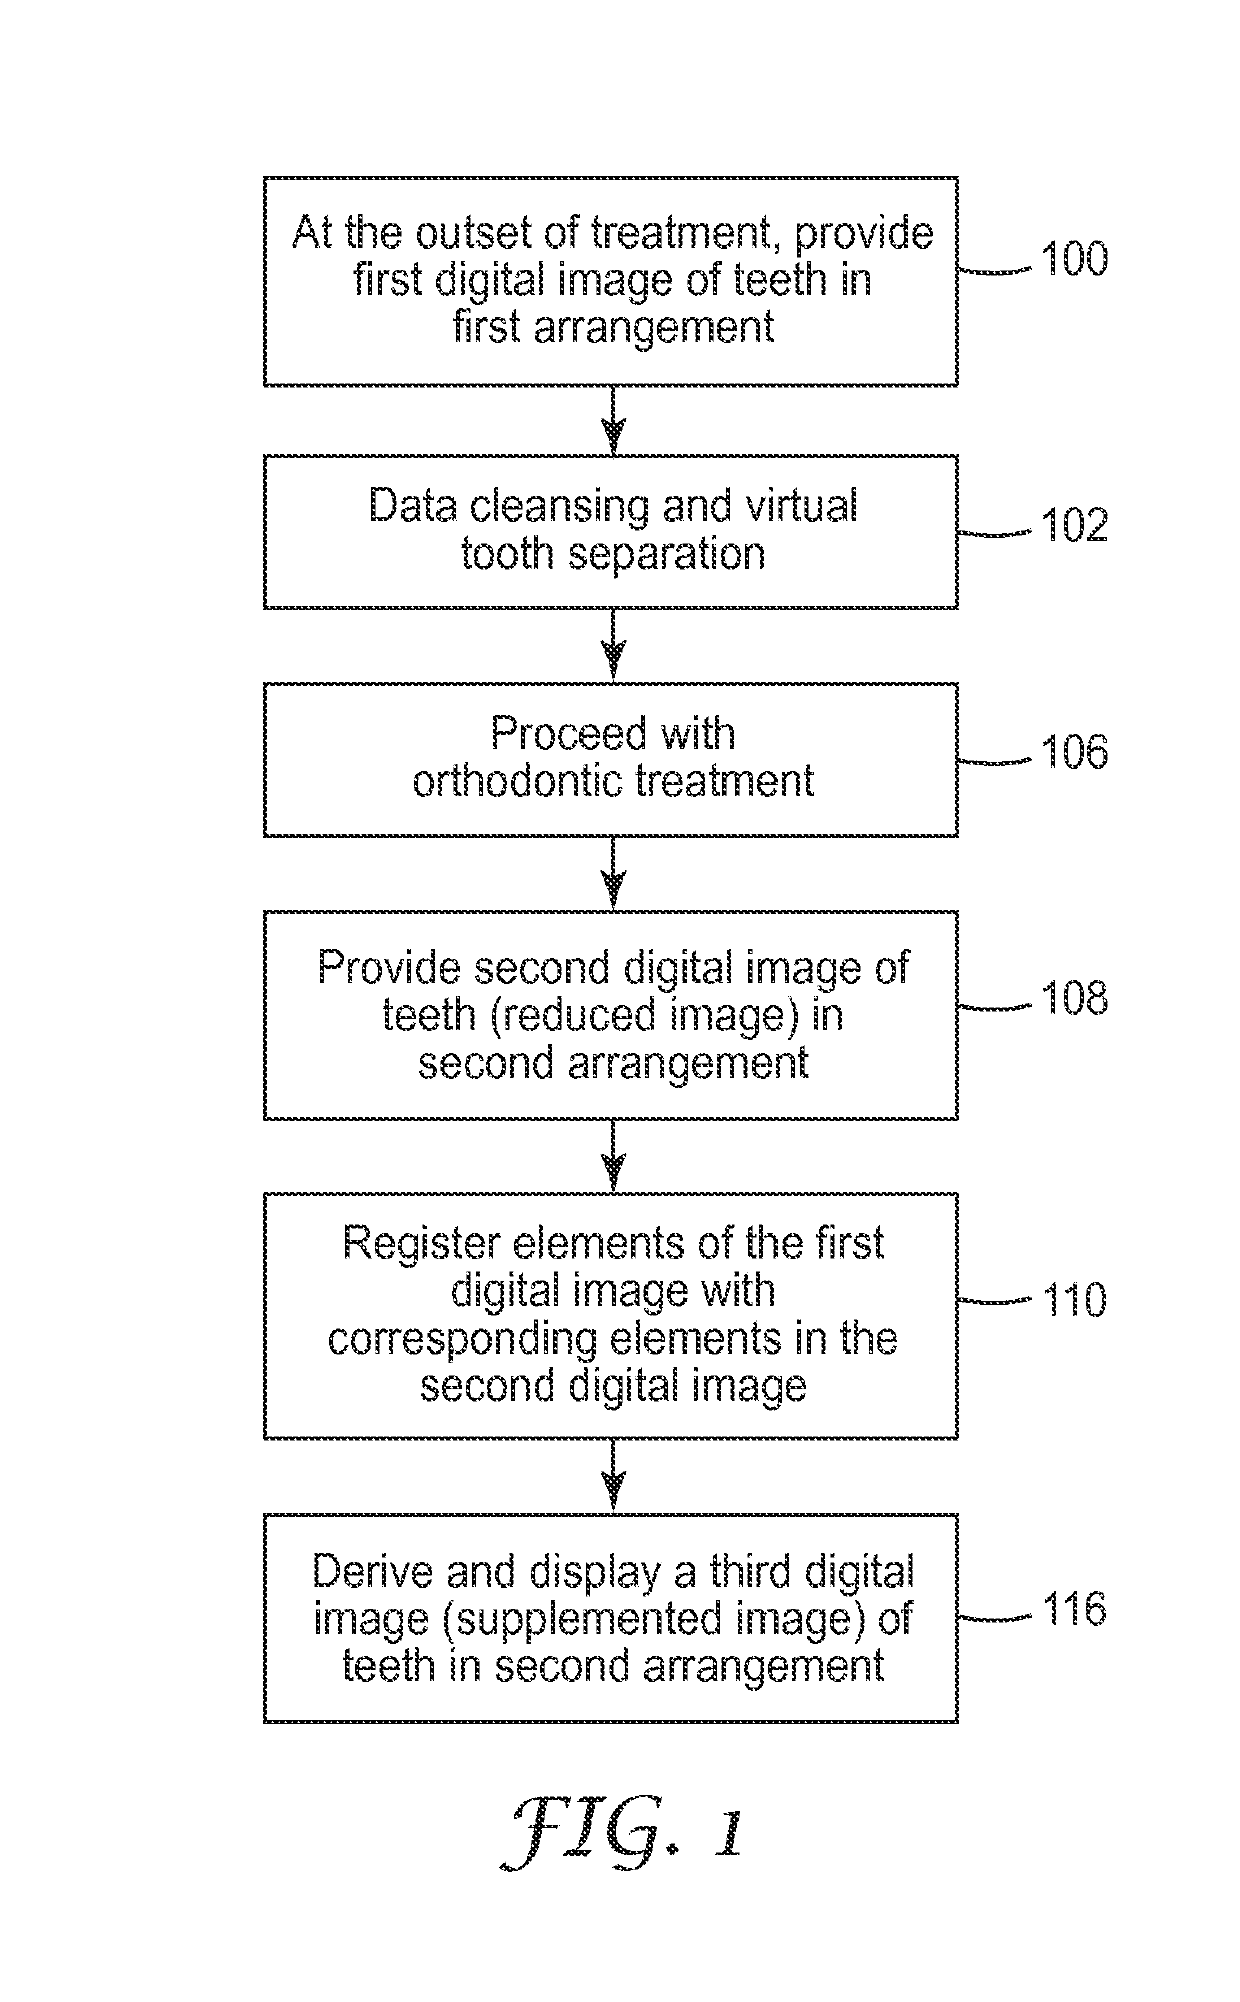 Orthodontic treatment monitoring based on reduced images